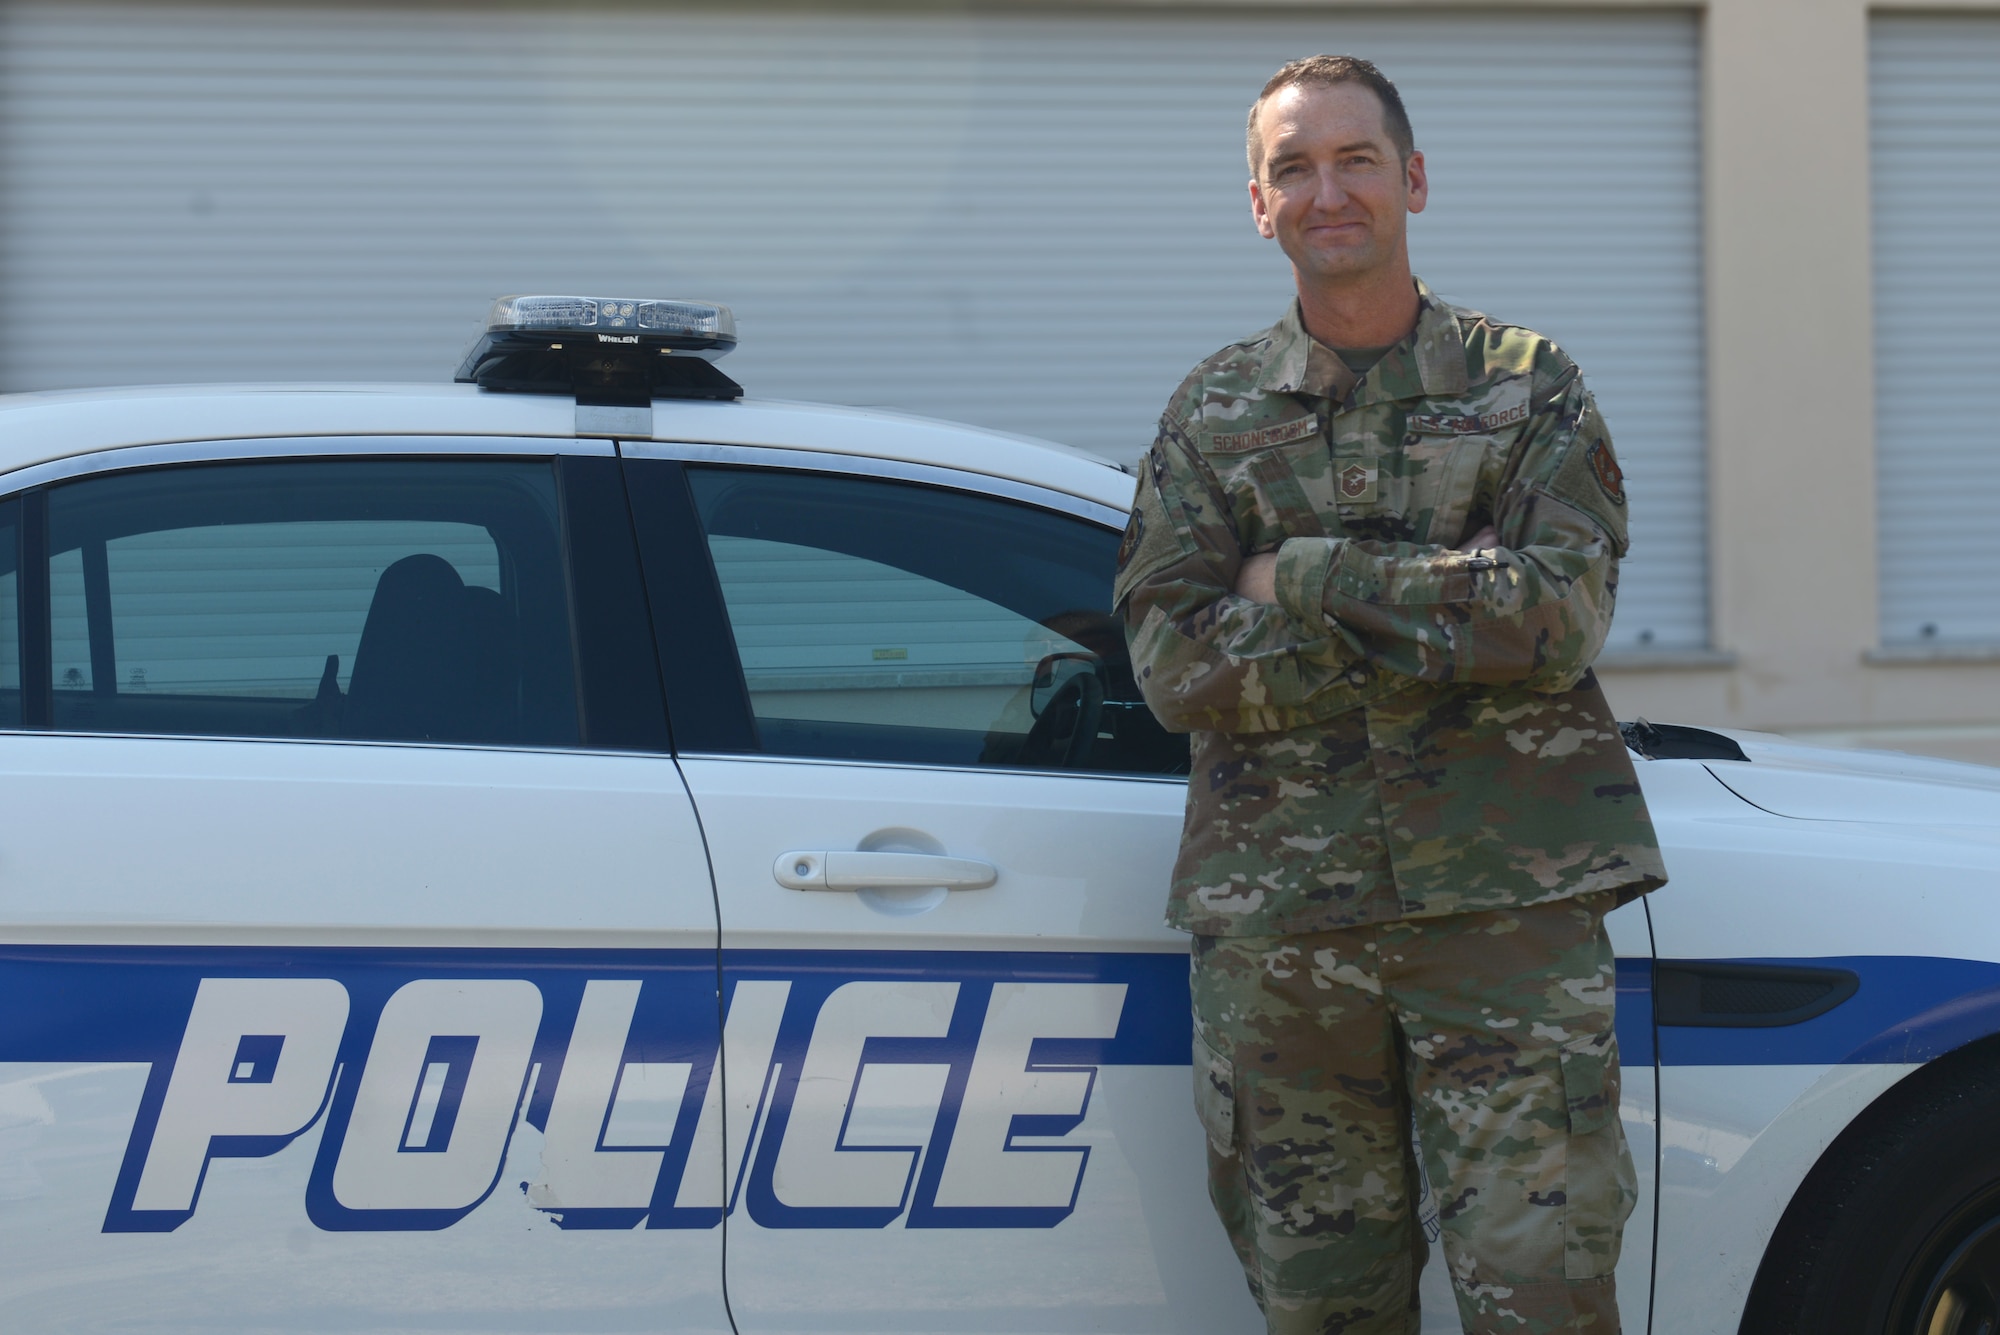 U.S. Air Force Senior Master Sgt. Jeremy Schoneboom, first sergeant of the 31st Security Forces Squadron poses for a photo next to a vehicle at Aviano Air Base, Italy, June 26, 2019. The 31st Security Forces Squadron maintains installation force protection during peacetime and wartime operations within eight separate base areas. (U.S. Air Force photo by Airman 1st Class Ericka A. Woolever).